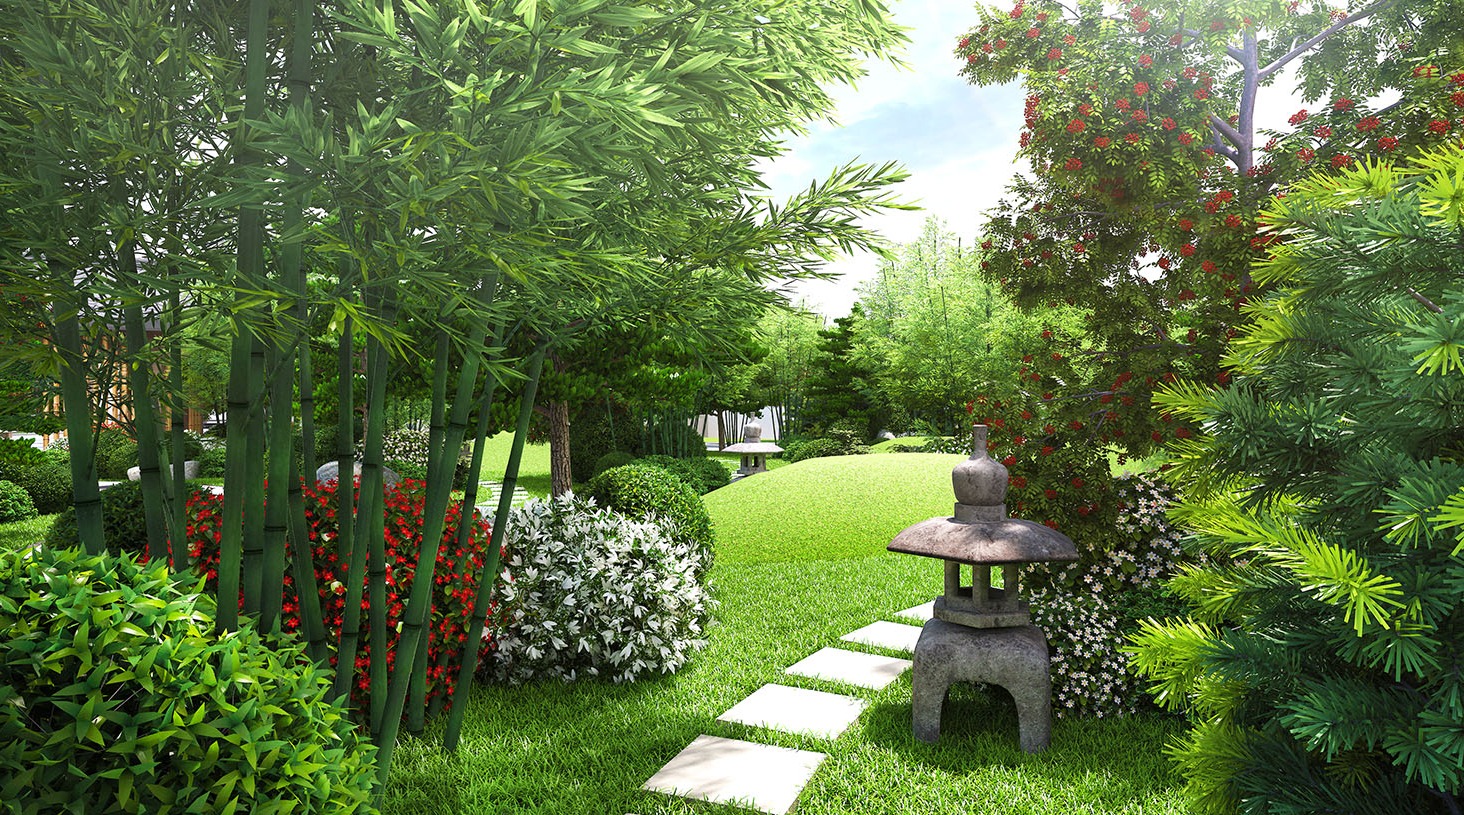 Kai Garden Residences’ verdant greenery will also be adorned with accessories and decorative stones fit for the condominium's Japanese Garden theme (artist’s illustration).